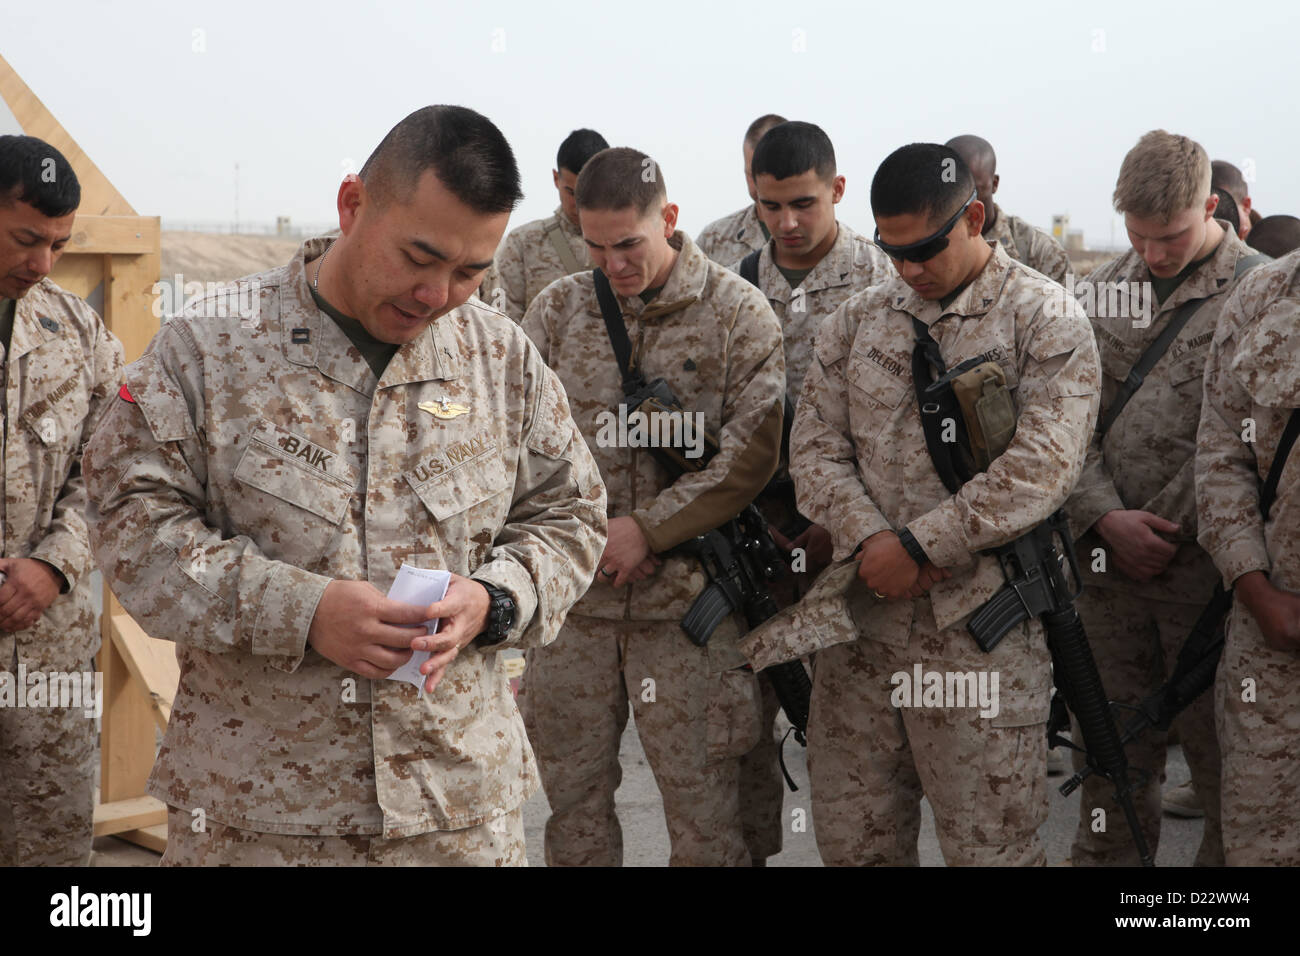 U.S. Navy Lt. Johan Baik, deputy wing chaplain, 3rd Marine Aircraft Wing (Forward), gives an invocation at Camp Bastion, Helmand province, Afghanistan, Jan. 10, 2013. Marine Aviation Logistics Squadron (MALS) 16 (FWD) dedicated their compound to Marine Co Stock Photo